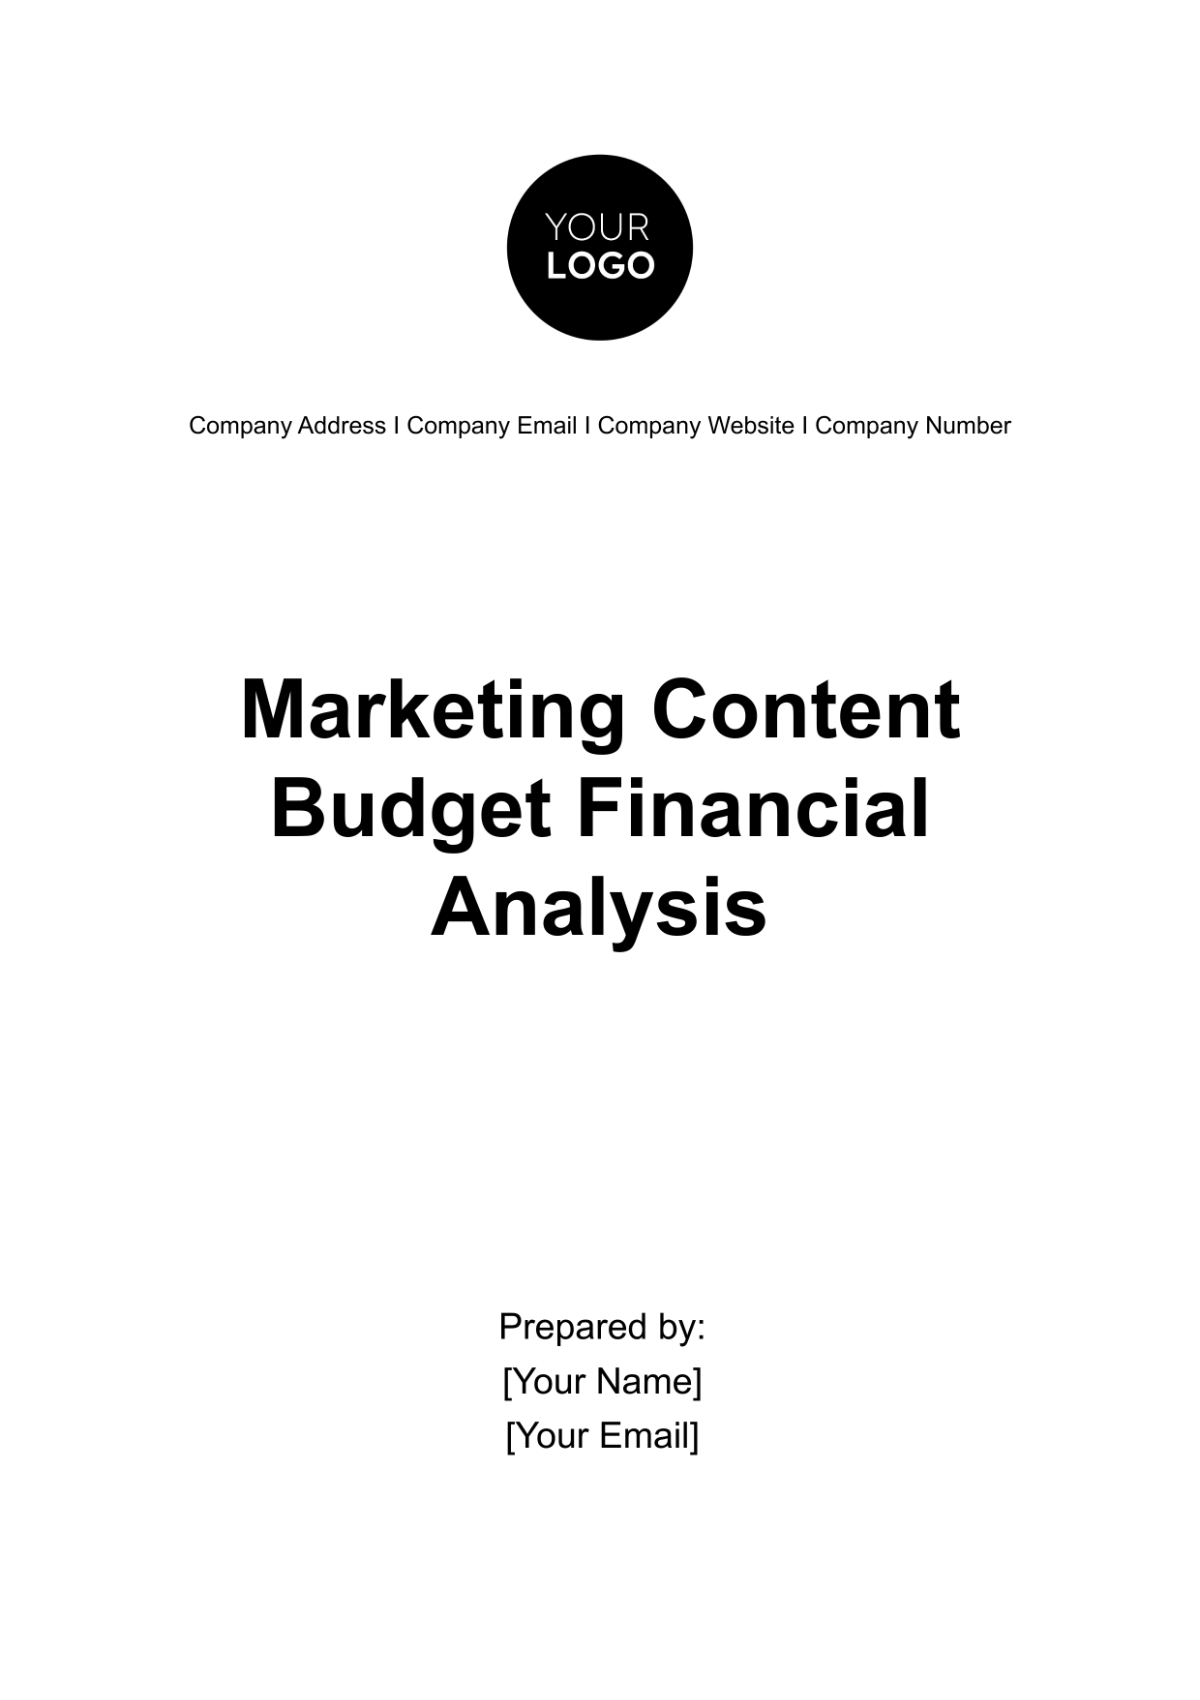 Free Marketing Content Budget Financial Analysis Template